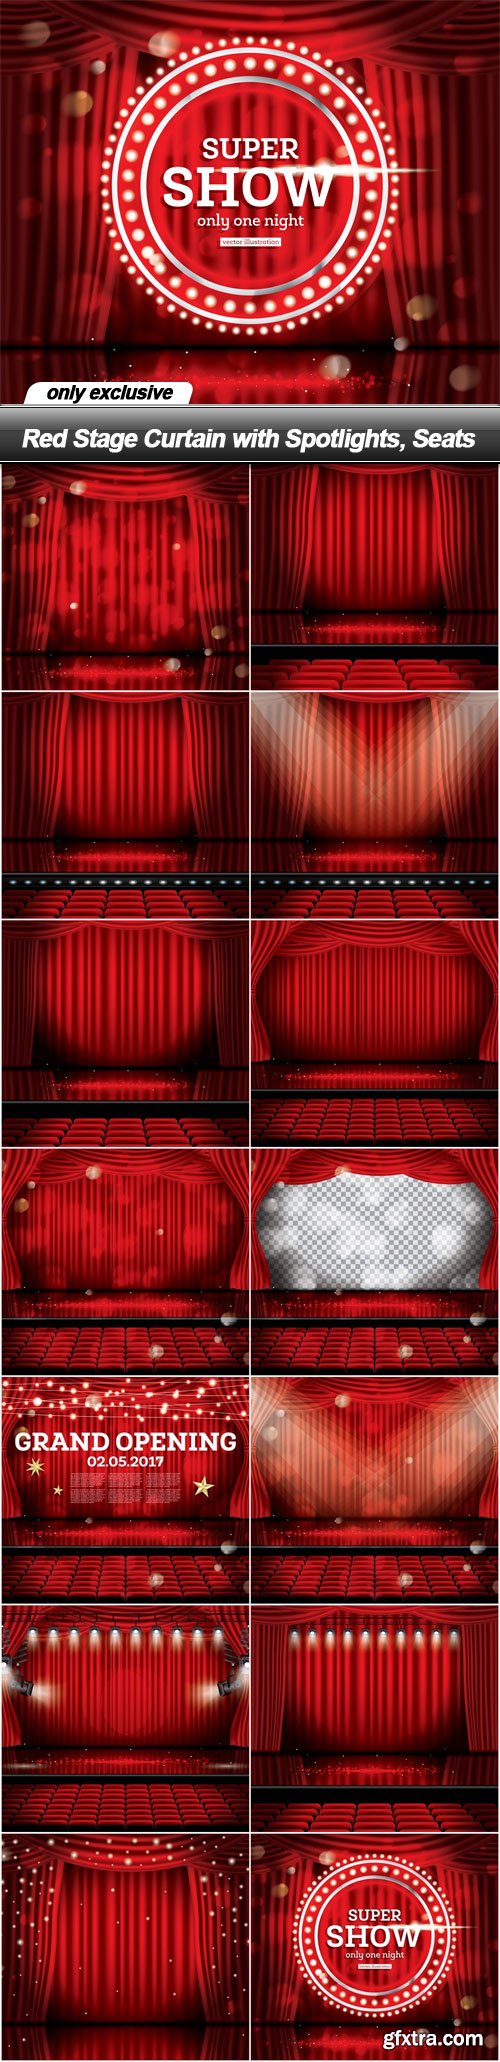 Red Stage Curtain with Spotlights, Seats - 14 EPS